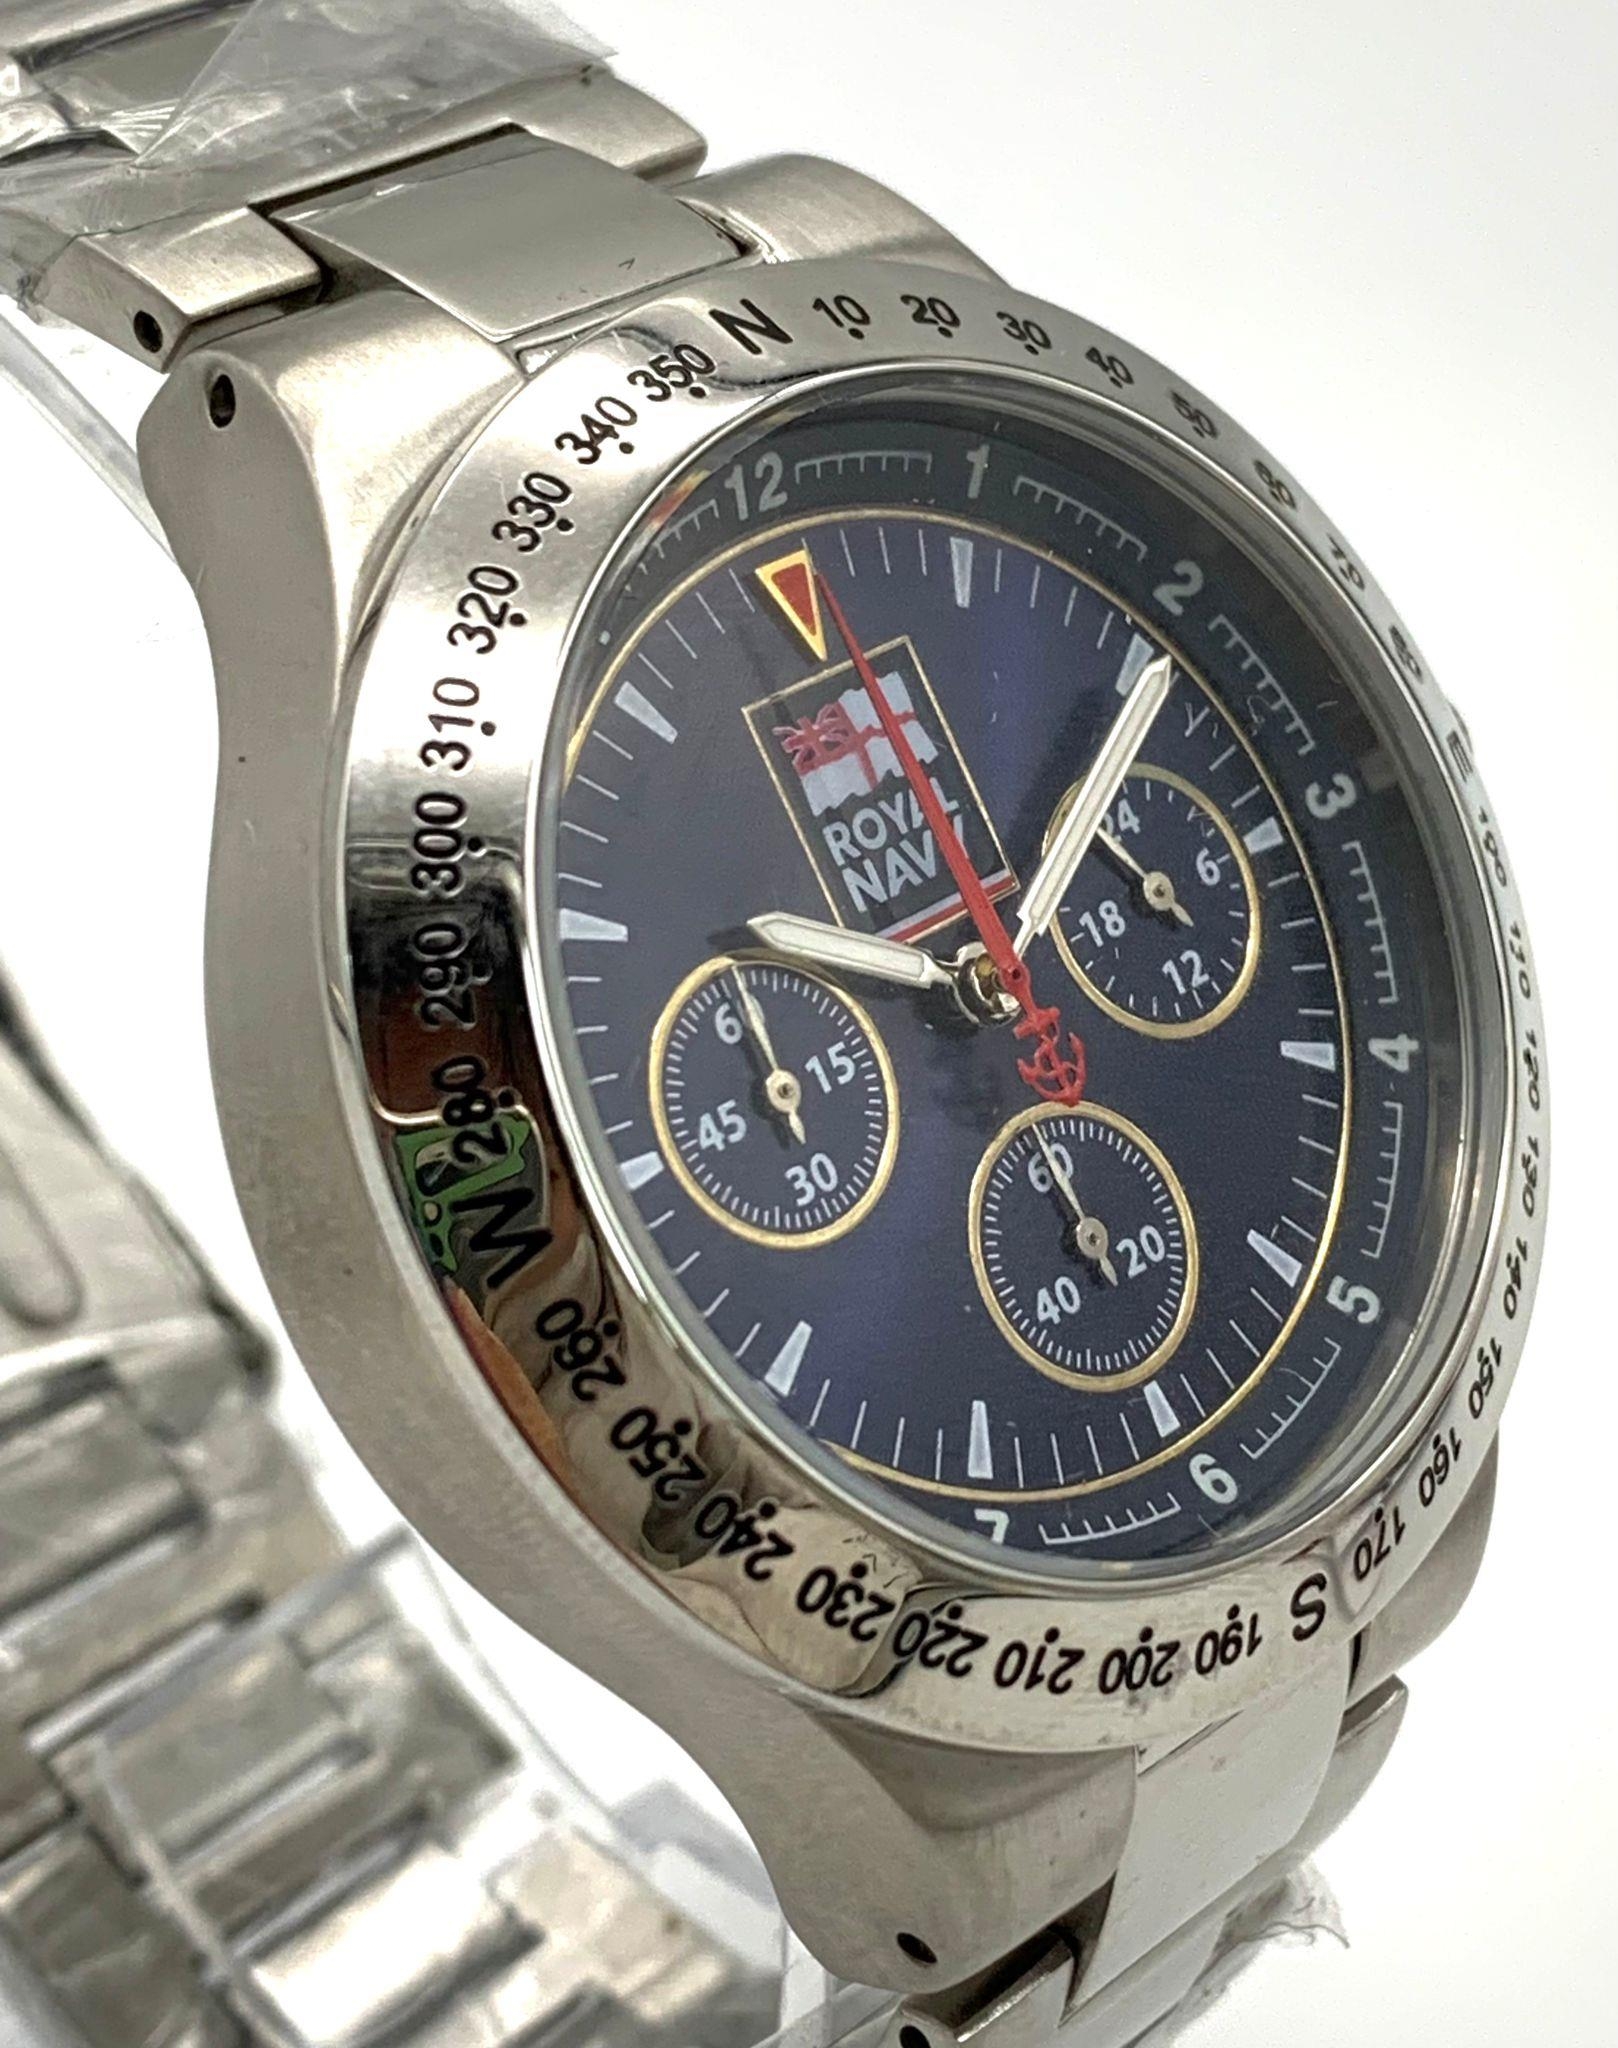 Unworn Limited Edition ‘Sovereign on the Seas’ Royal Navy Chronograph Watch, still in Original Box - Image 5 of 12